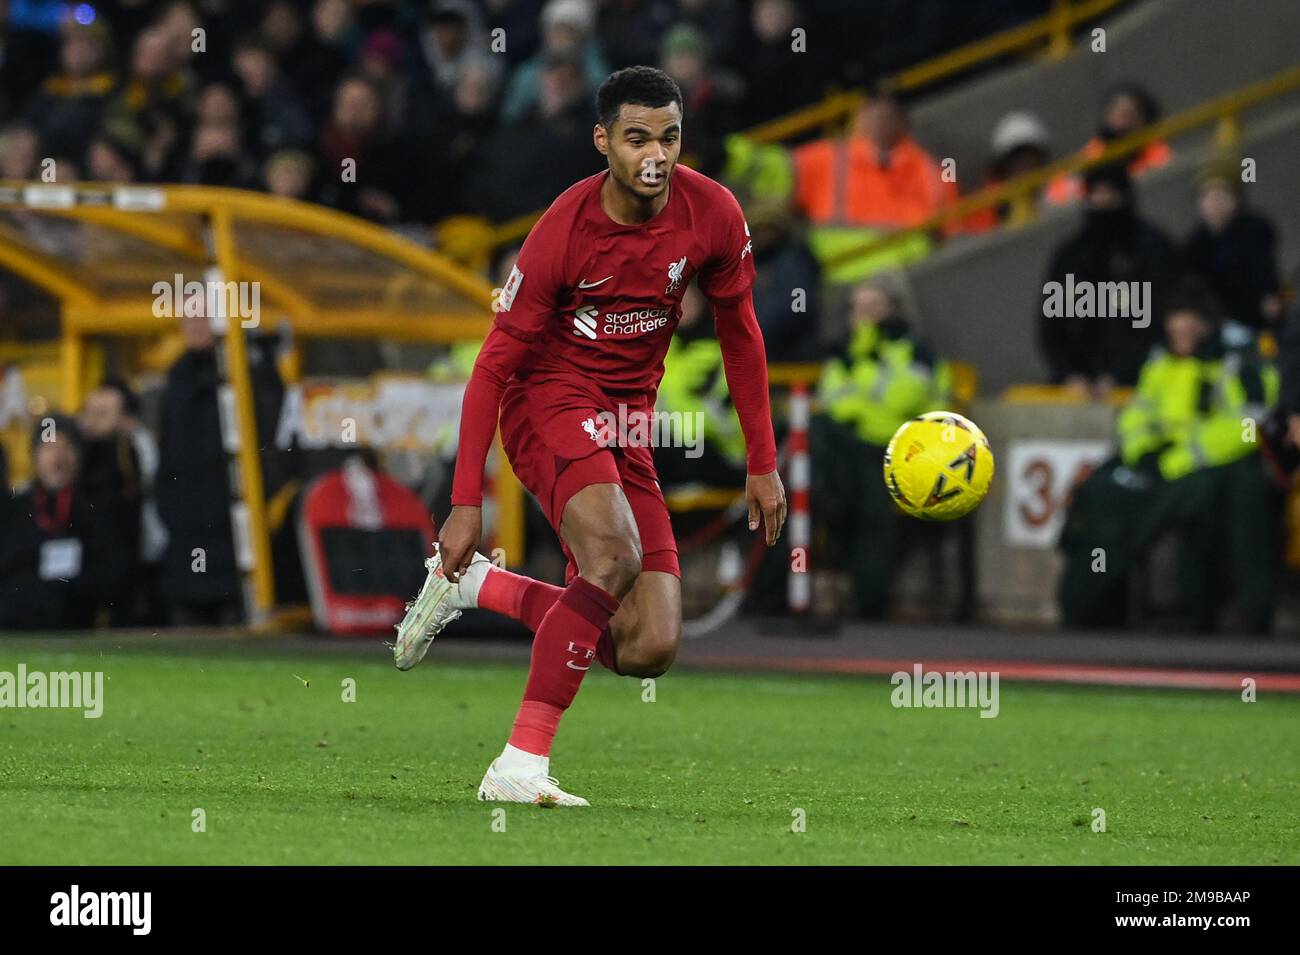 Cody Gakpo #18 of Liverpool breaks with the ball during the Emirates FA Cup Third Round Replay match Wolverhampton Wanderers vs Liverpool at Molineux, Wolverhampton, United Kingdom, 17th January 2023  (Photo by Craig Thomas/News Images) Stock Photo